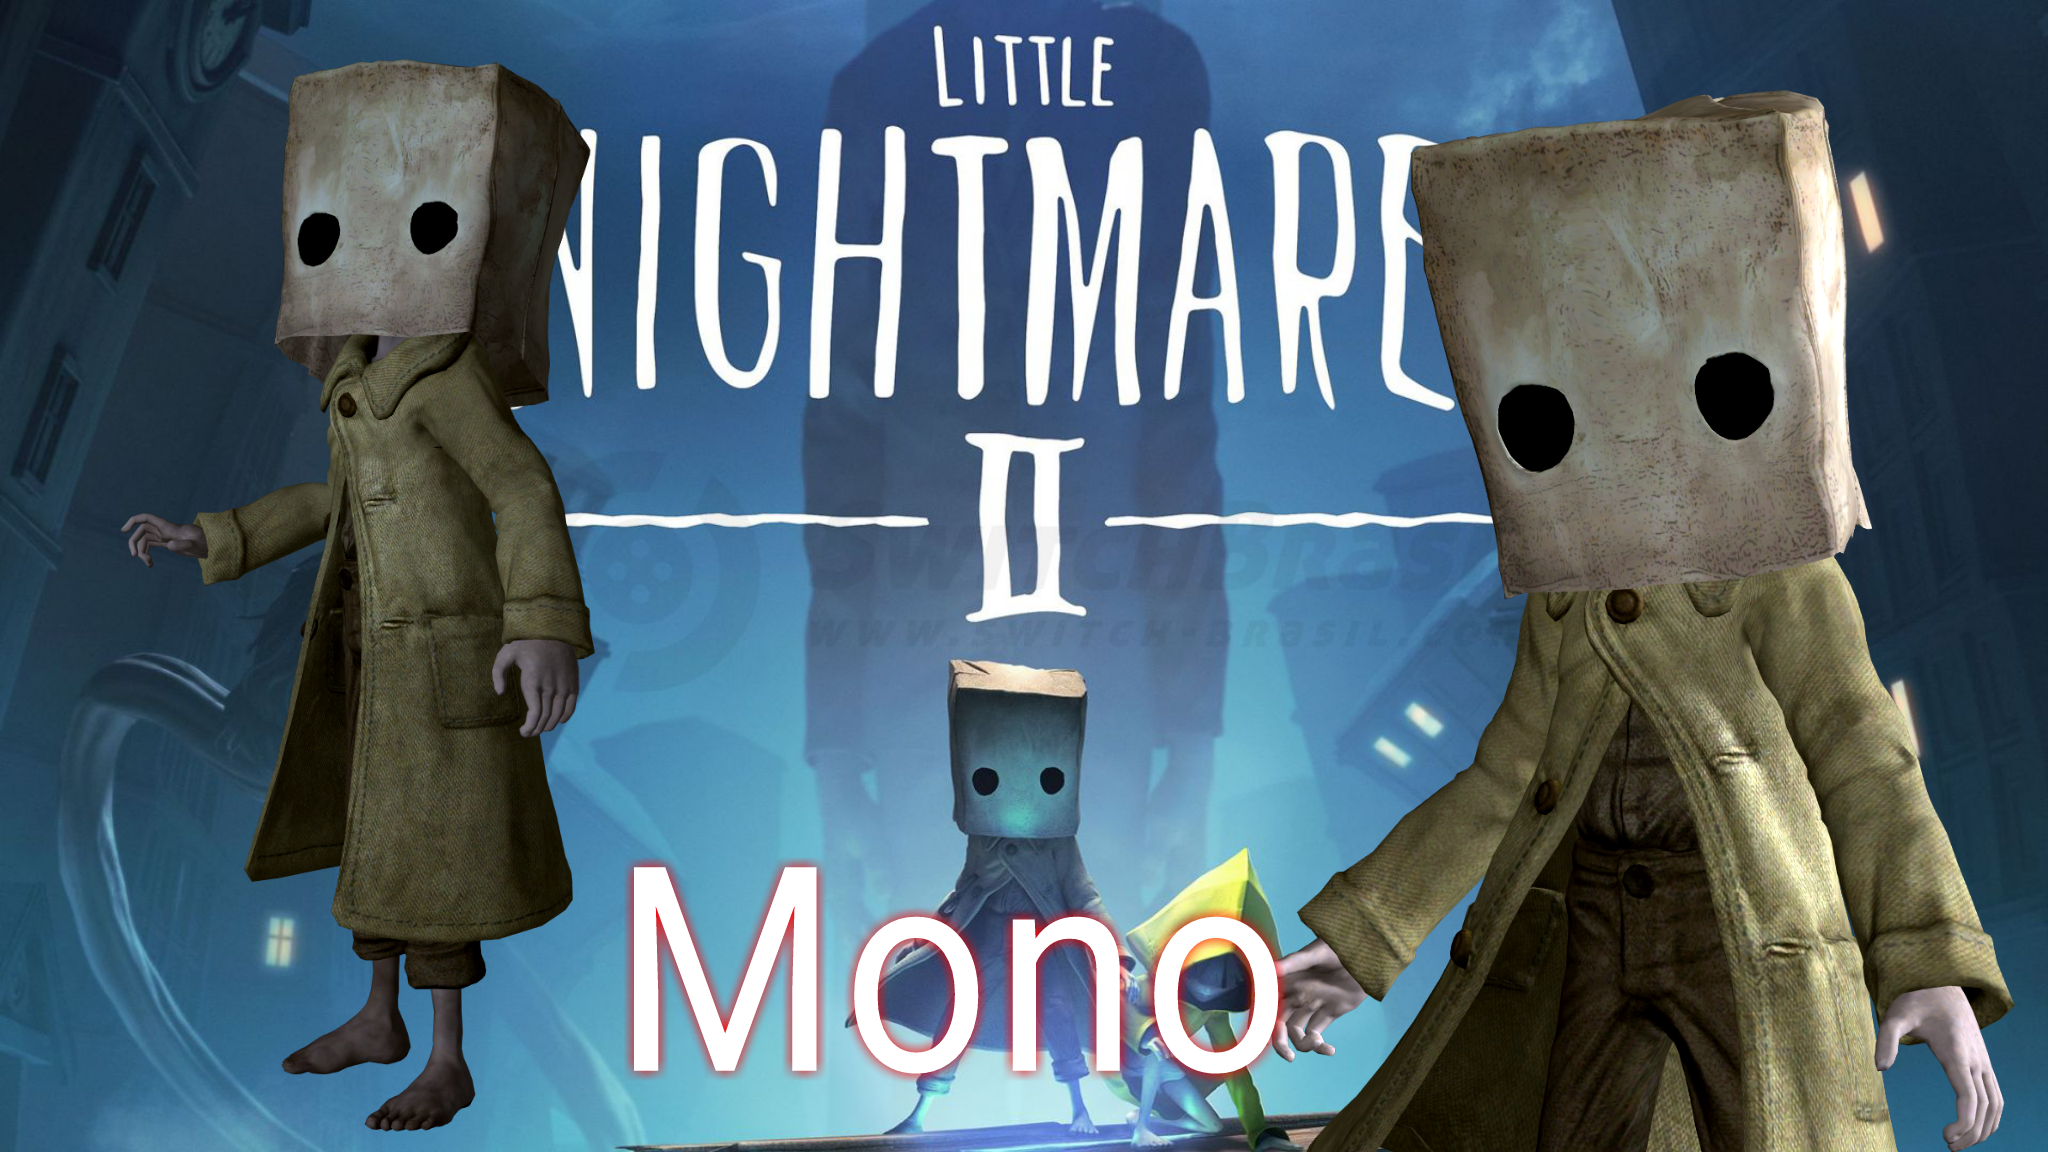 Monster six Little Nightmares 2 (XPS) Download by Tyrant0400Tp on DeviantArt